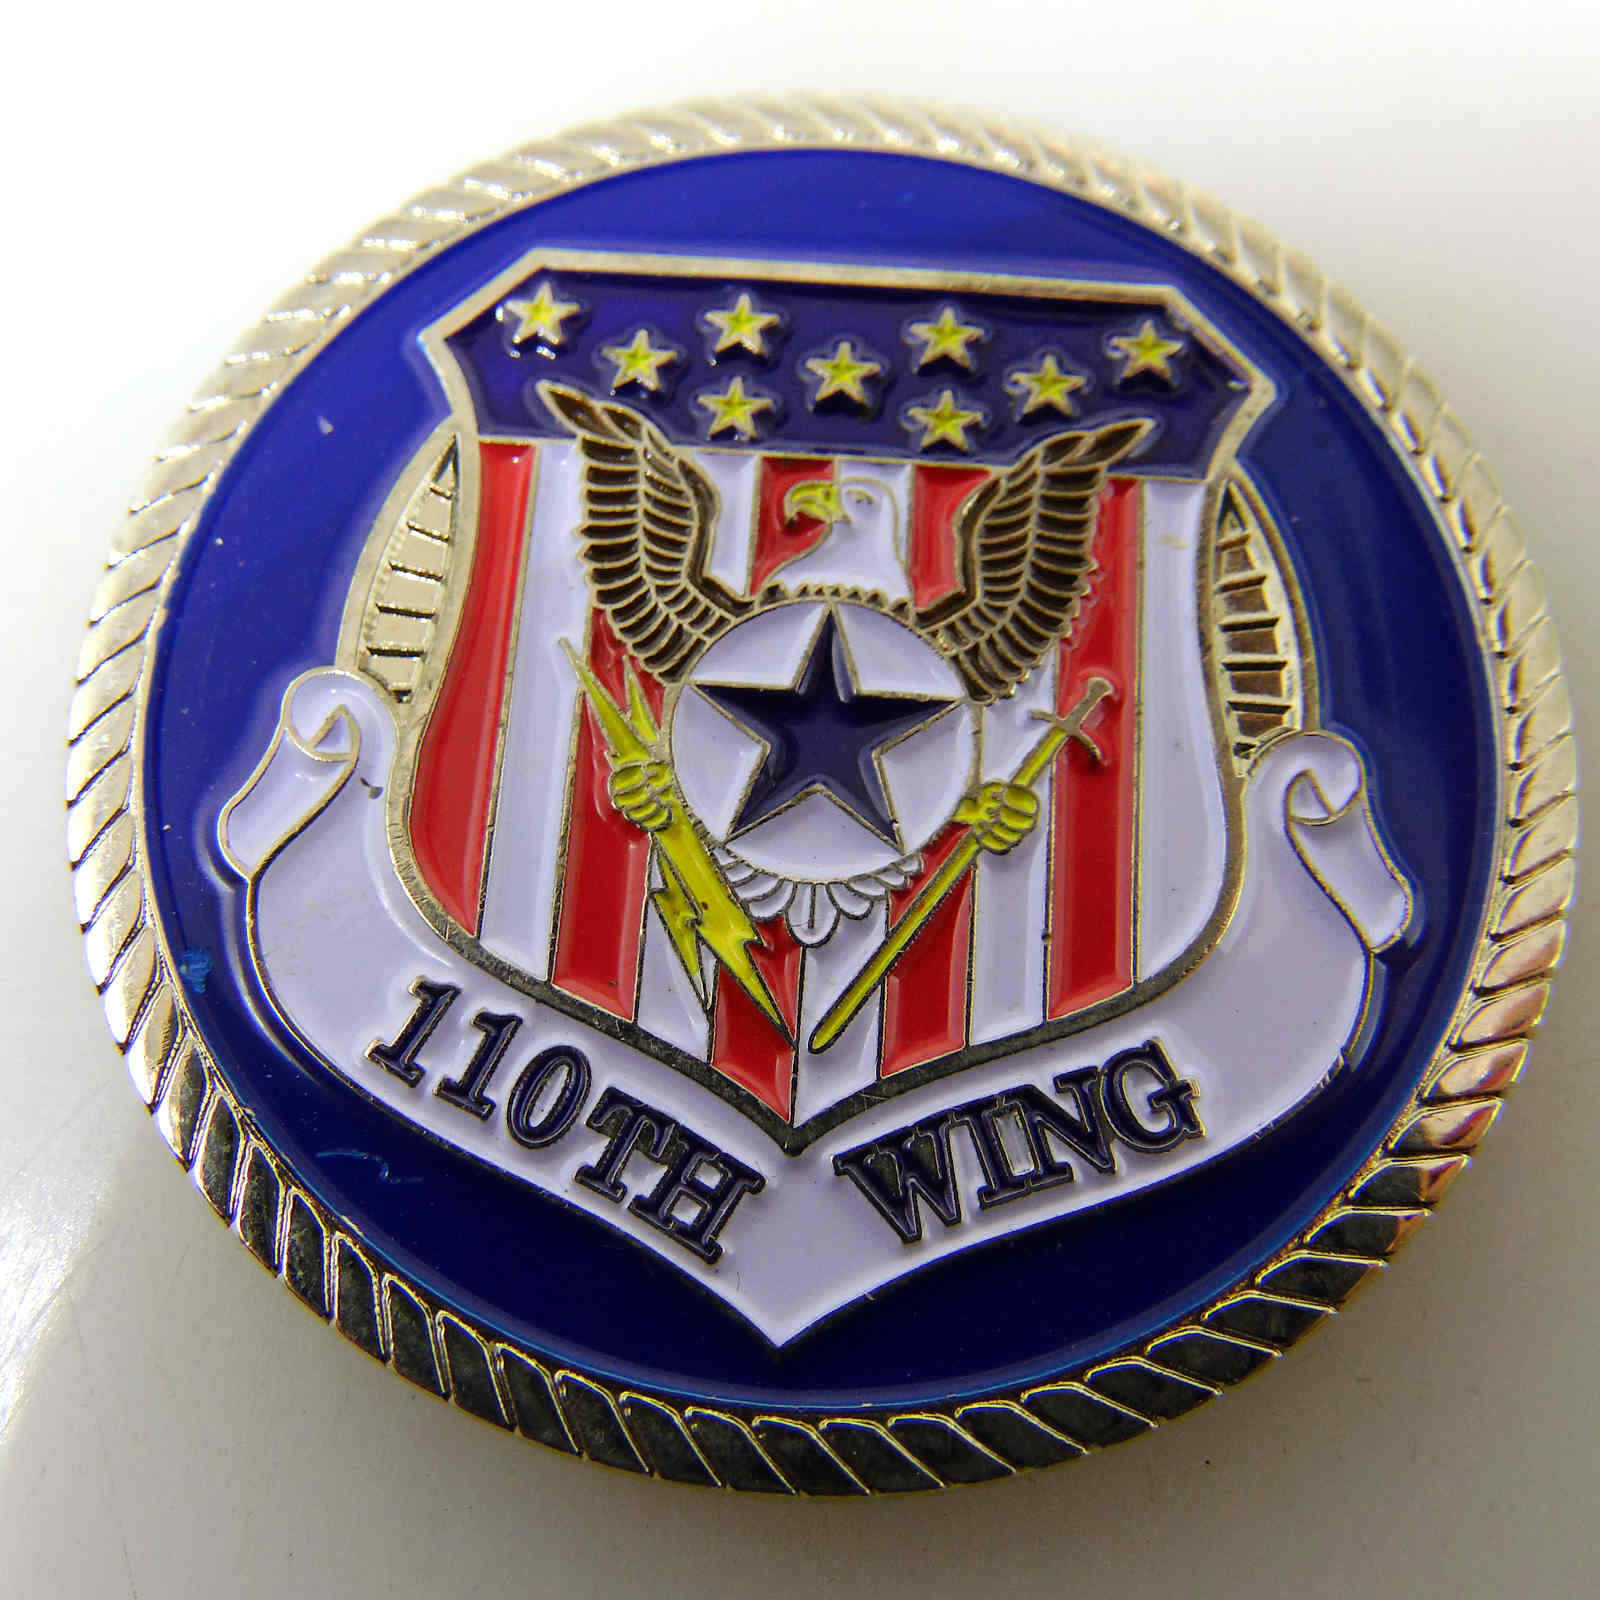 U.S. AIR FORCE BATTLE CREEK ANGB 110TH WING CHALLENGE COIN